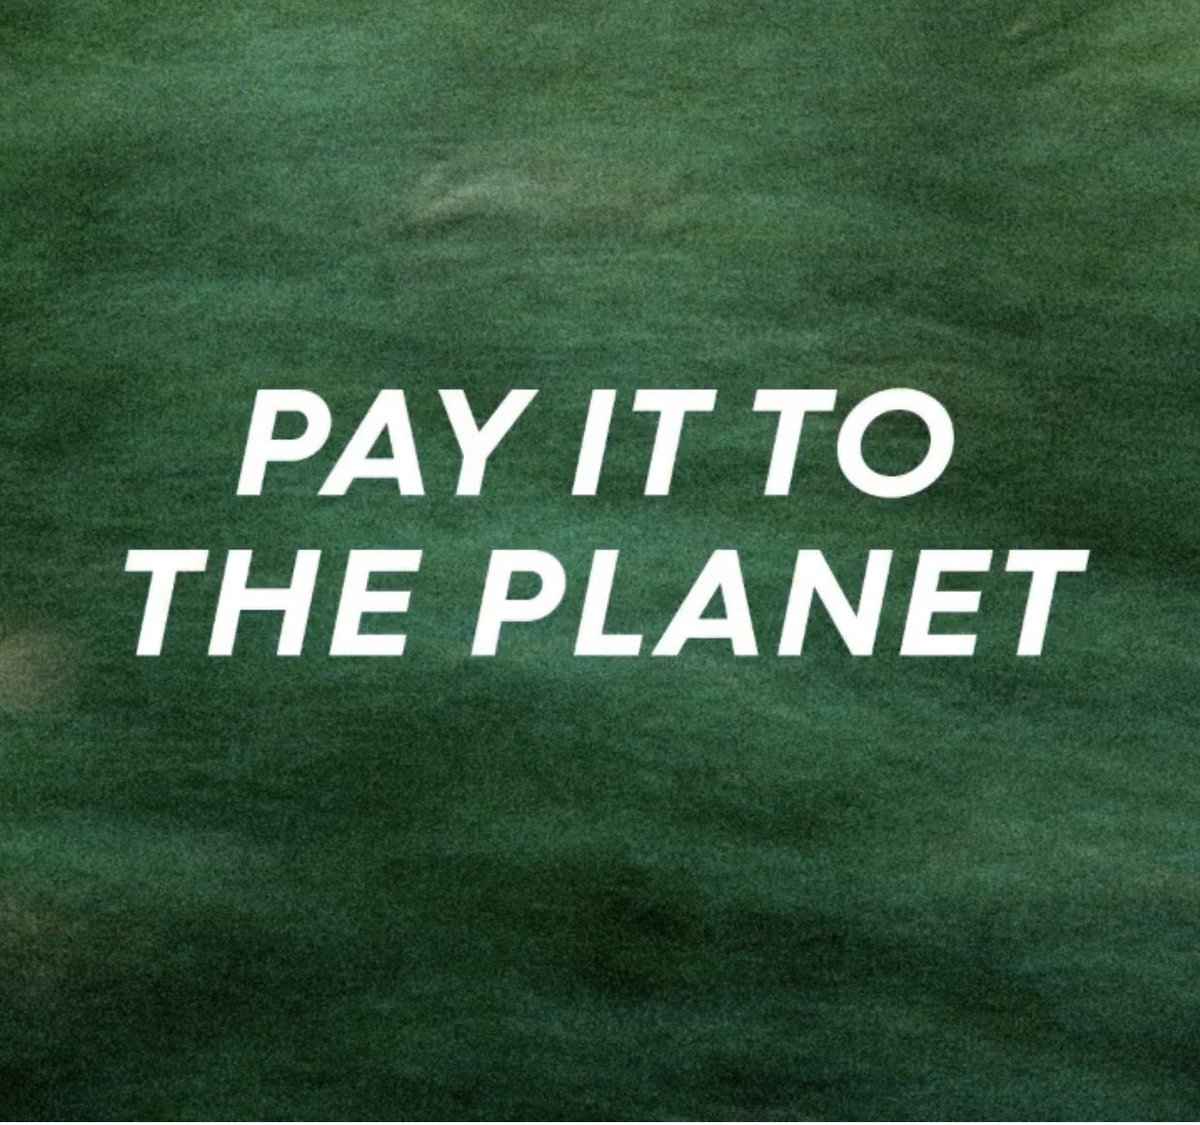 Instead of lowering their prices,  @Allbirds decided to raise them by $1.They’re matching every dollar and donating them to Fridays for Future, a global force calling for climate justice.With this, they want people to consider the impact over-consumption has on the planet. 